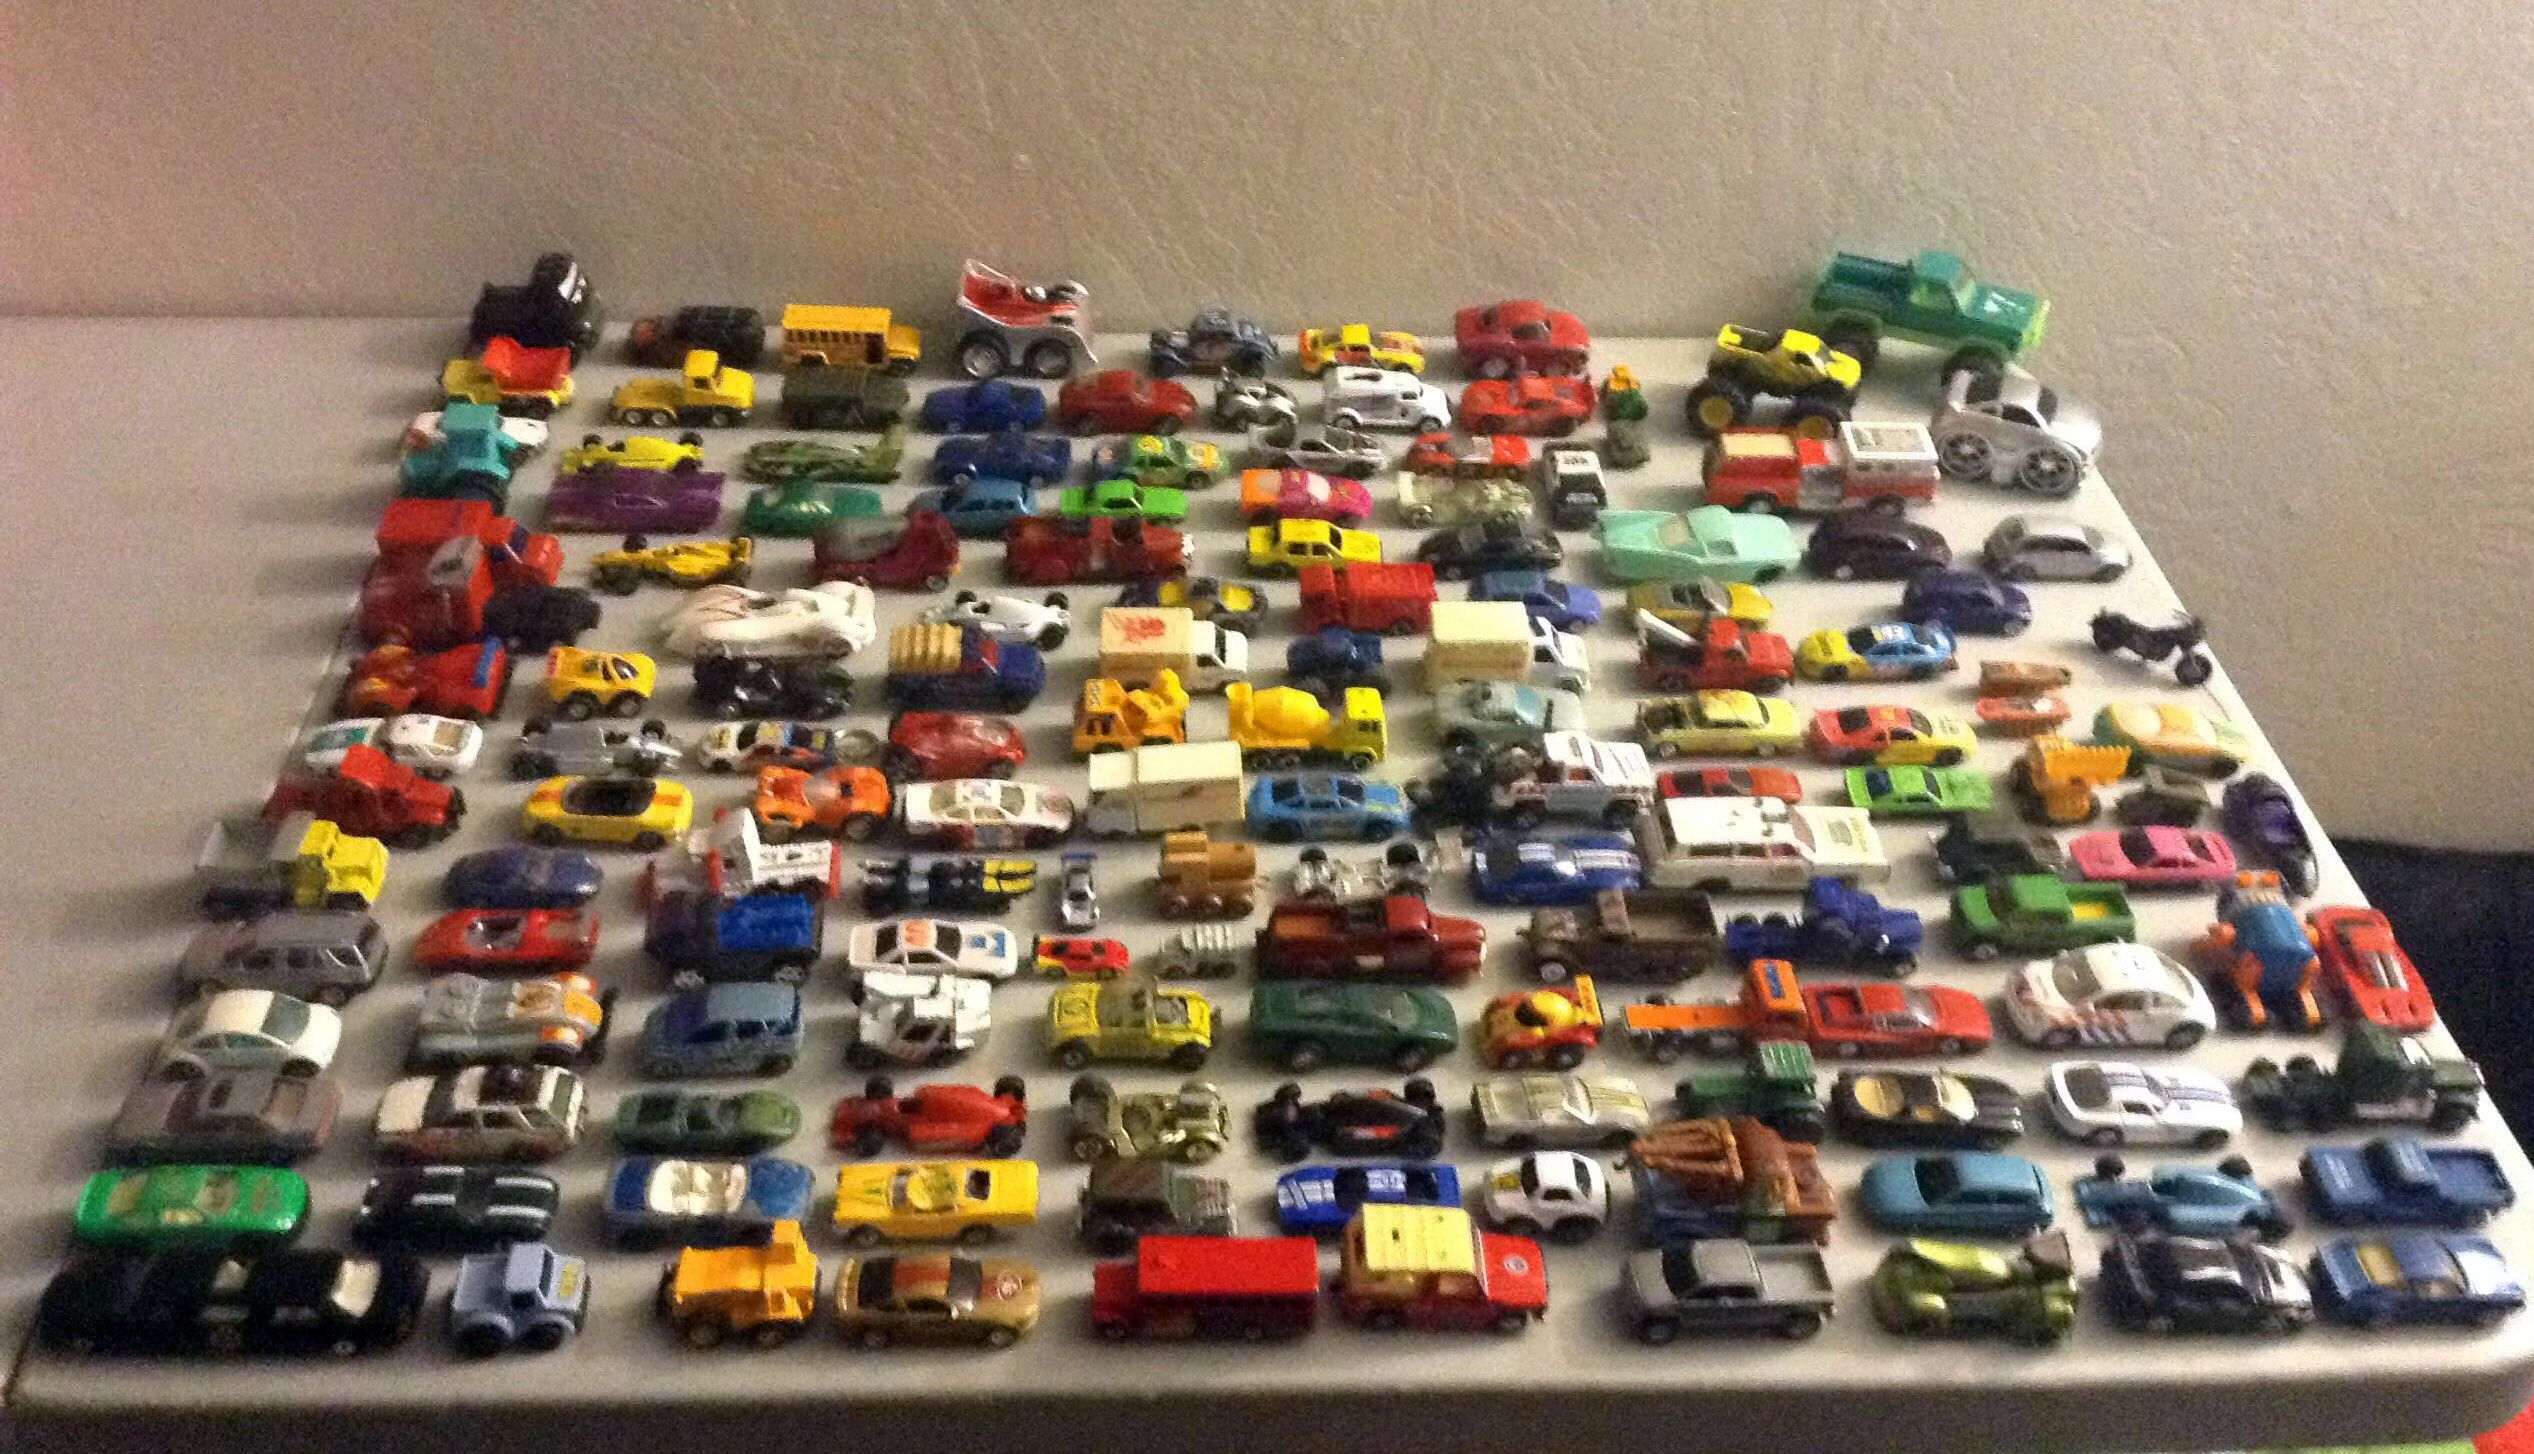 60+ Cars, ALL FOR $30